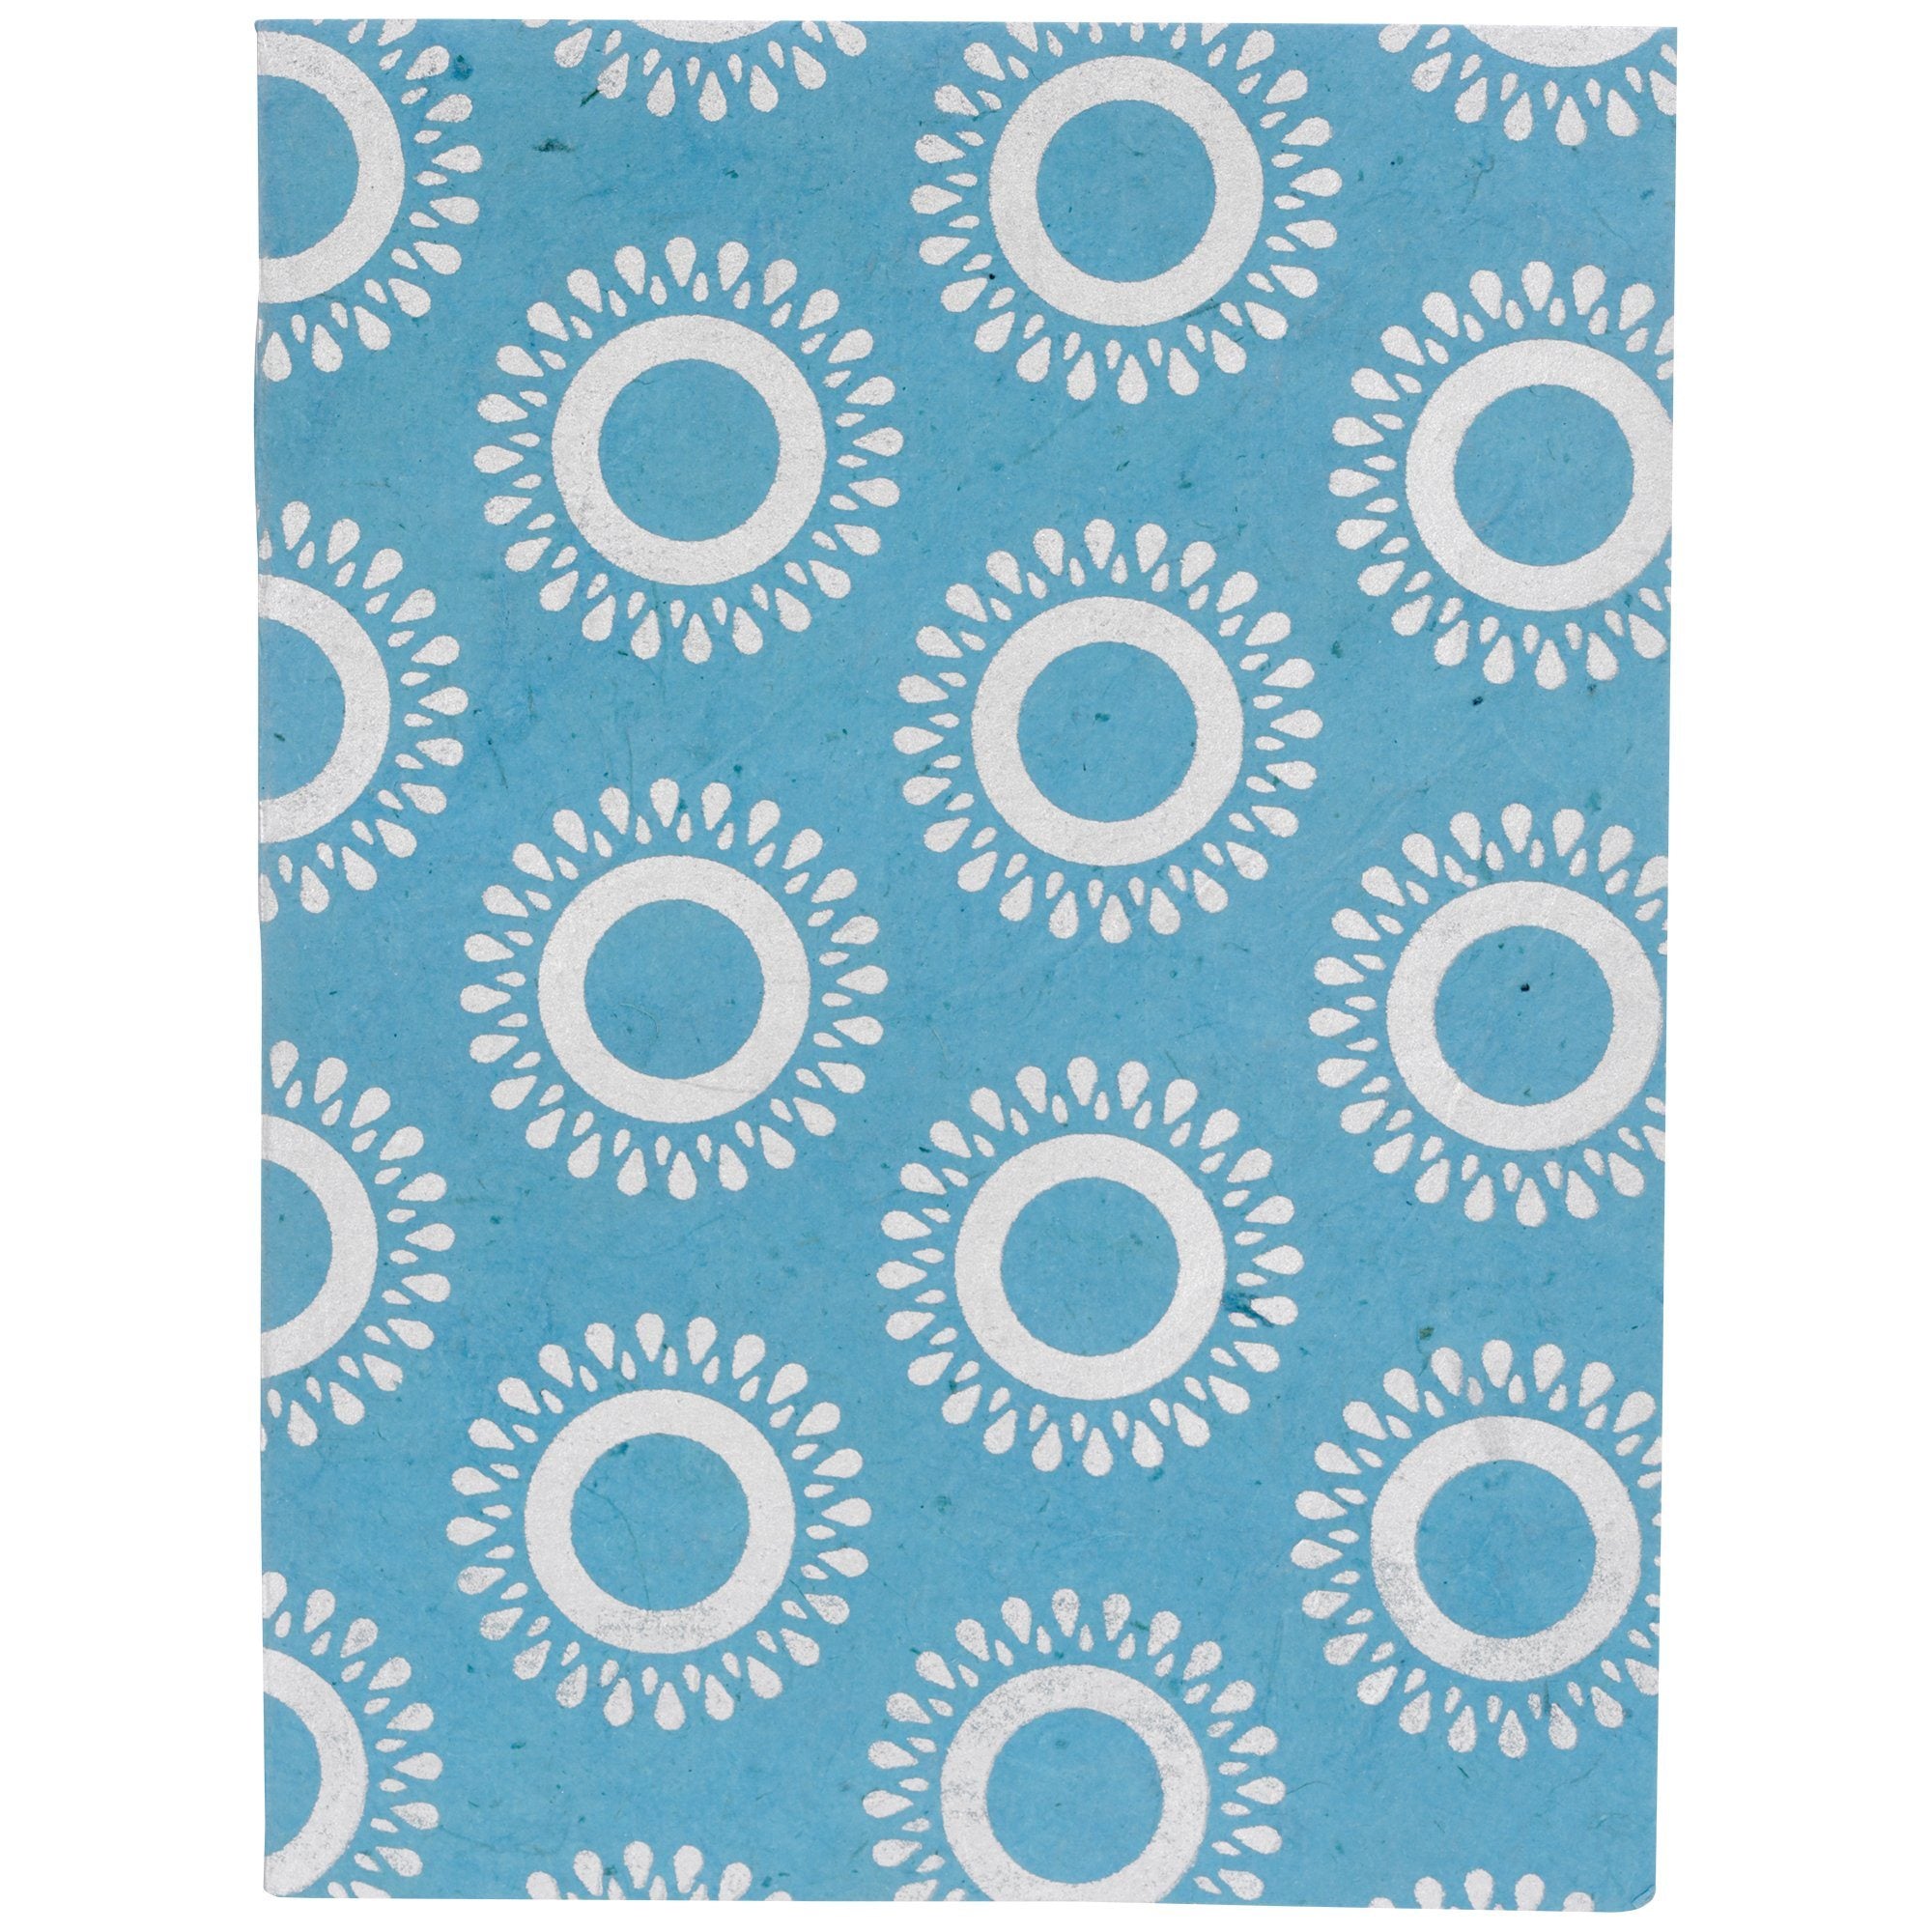 Reflections Lokta Paper Journal - Turquoise